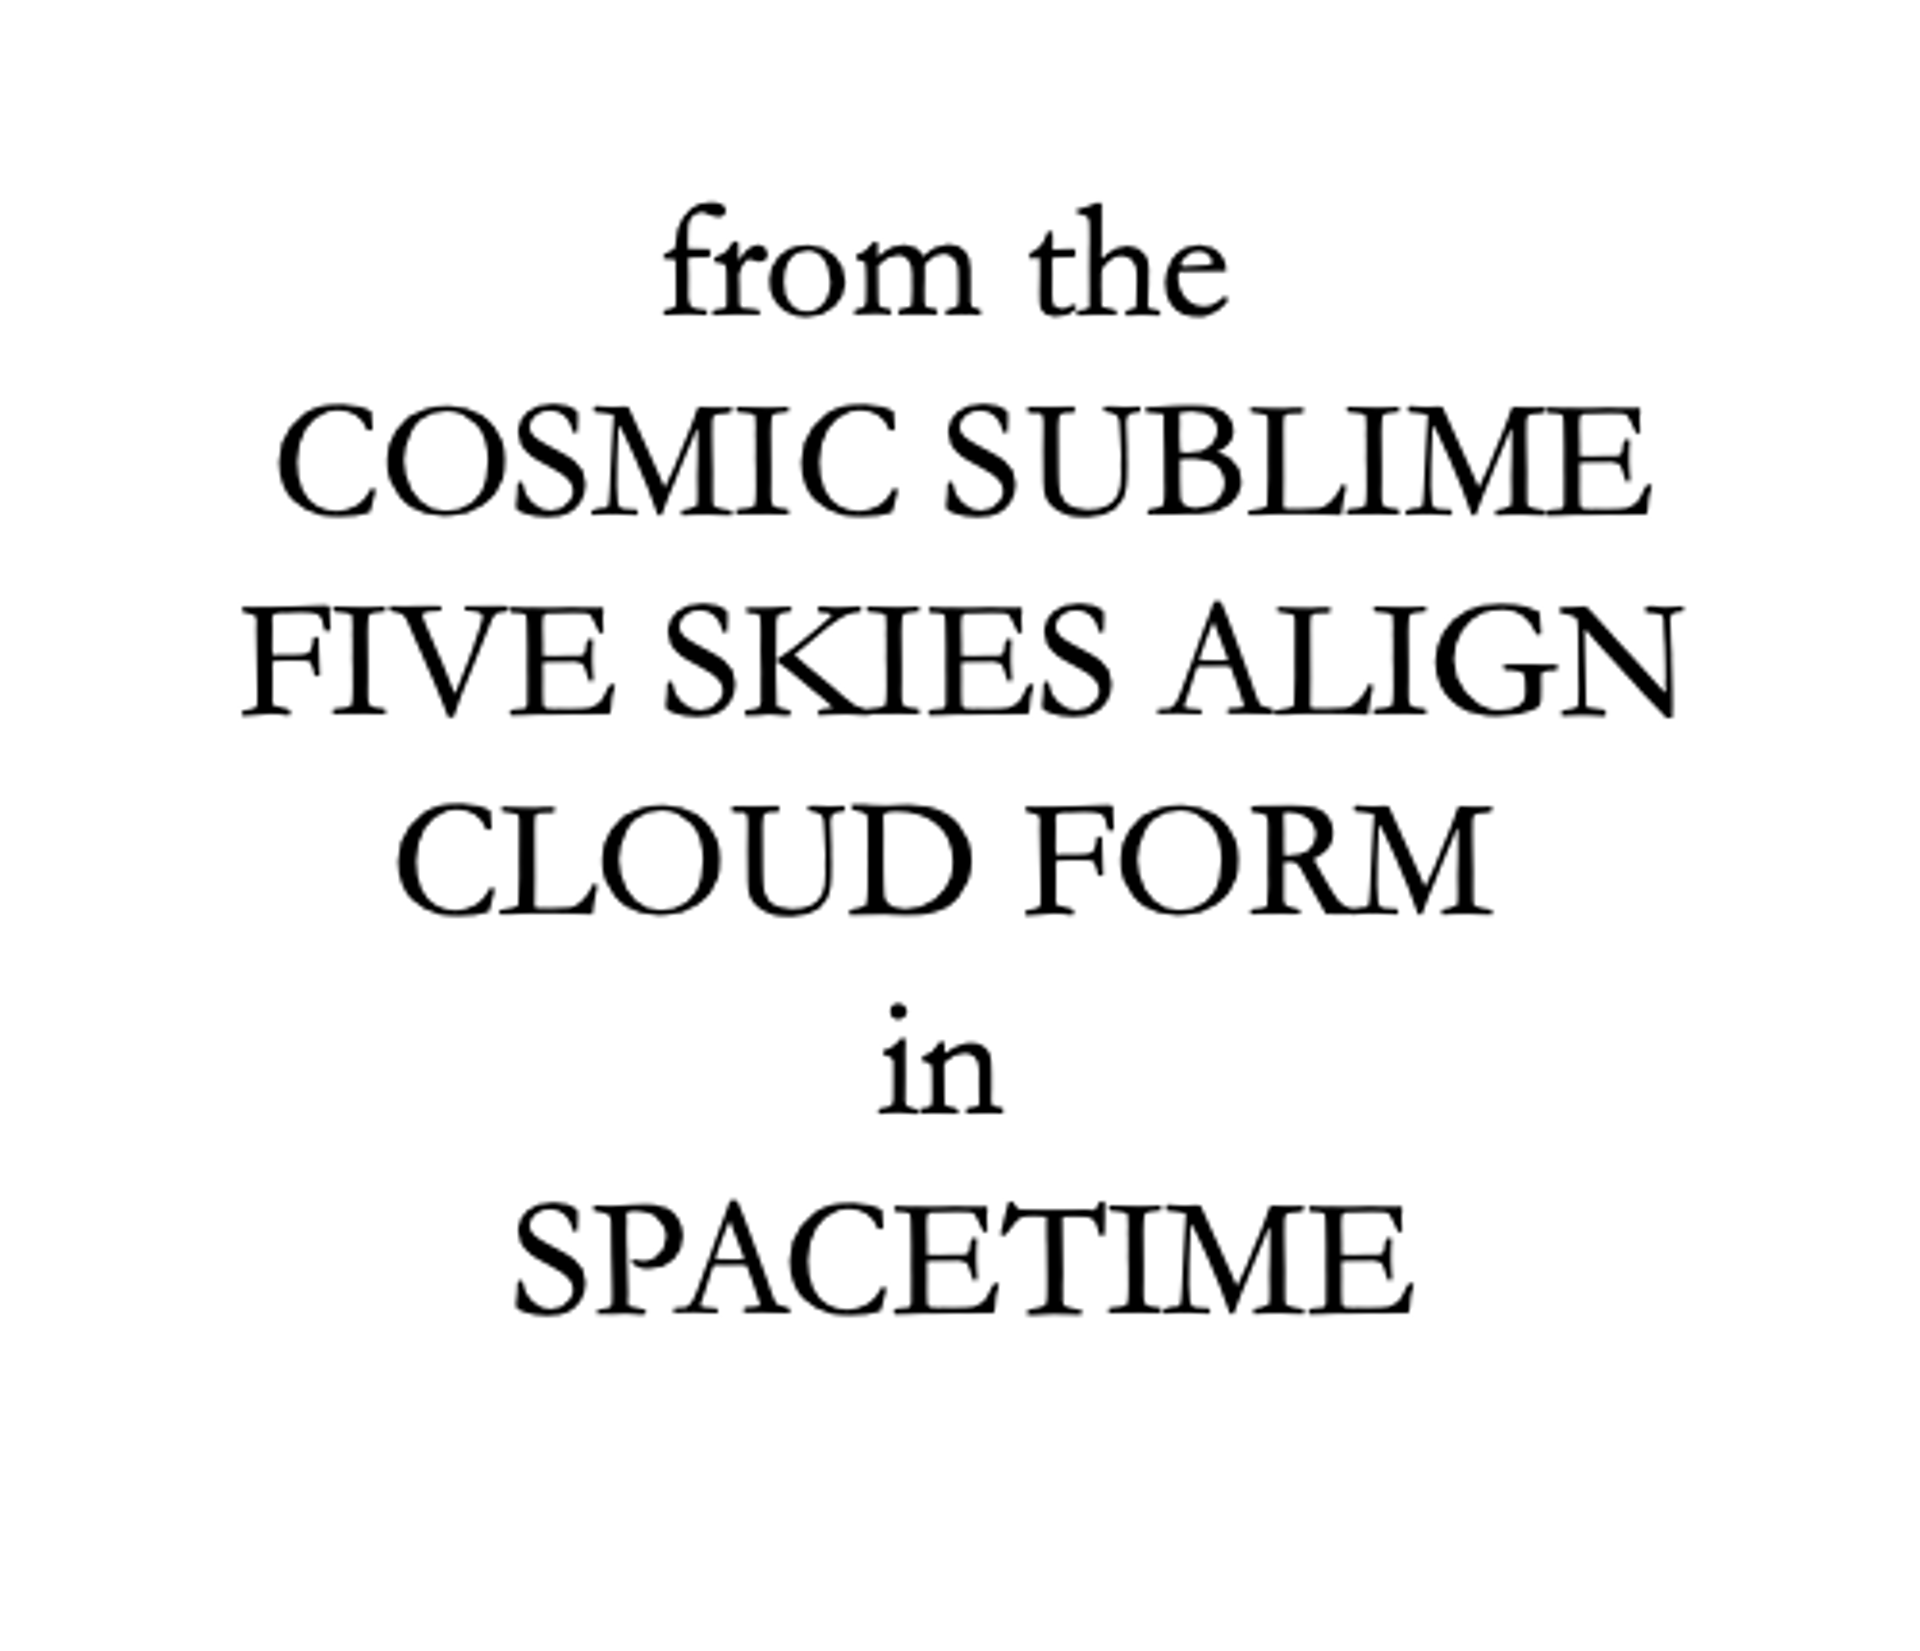 from the COSMIC SUBLIME, FIVE SKIES ALIGN, CLOUD FORM in SPACETIME by Nancy L. Purington